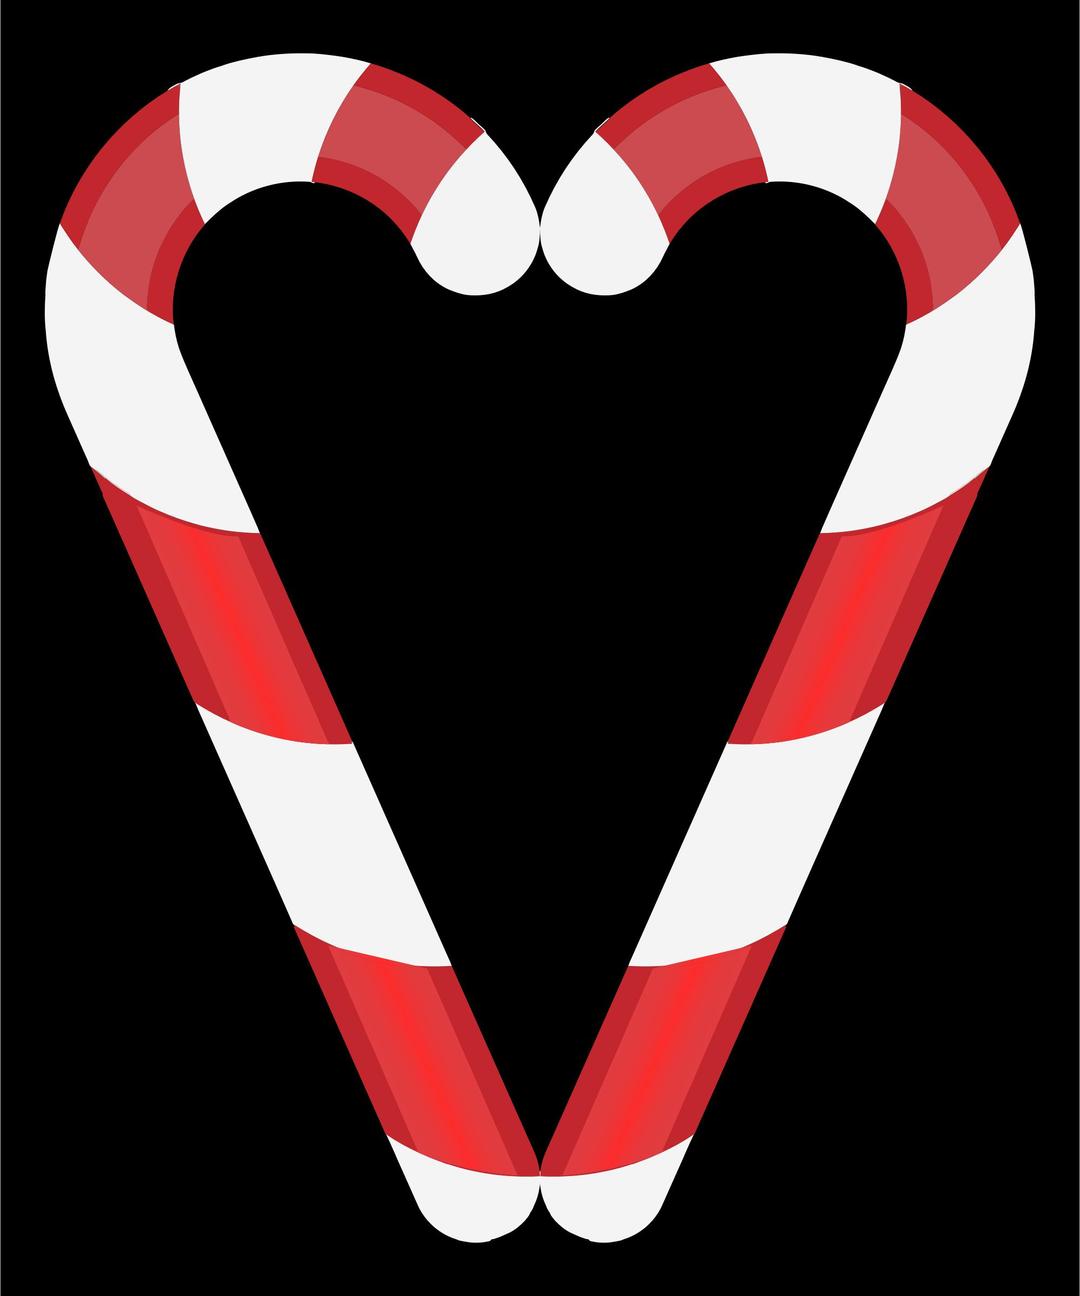 Candy Cane Heart png transparent